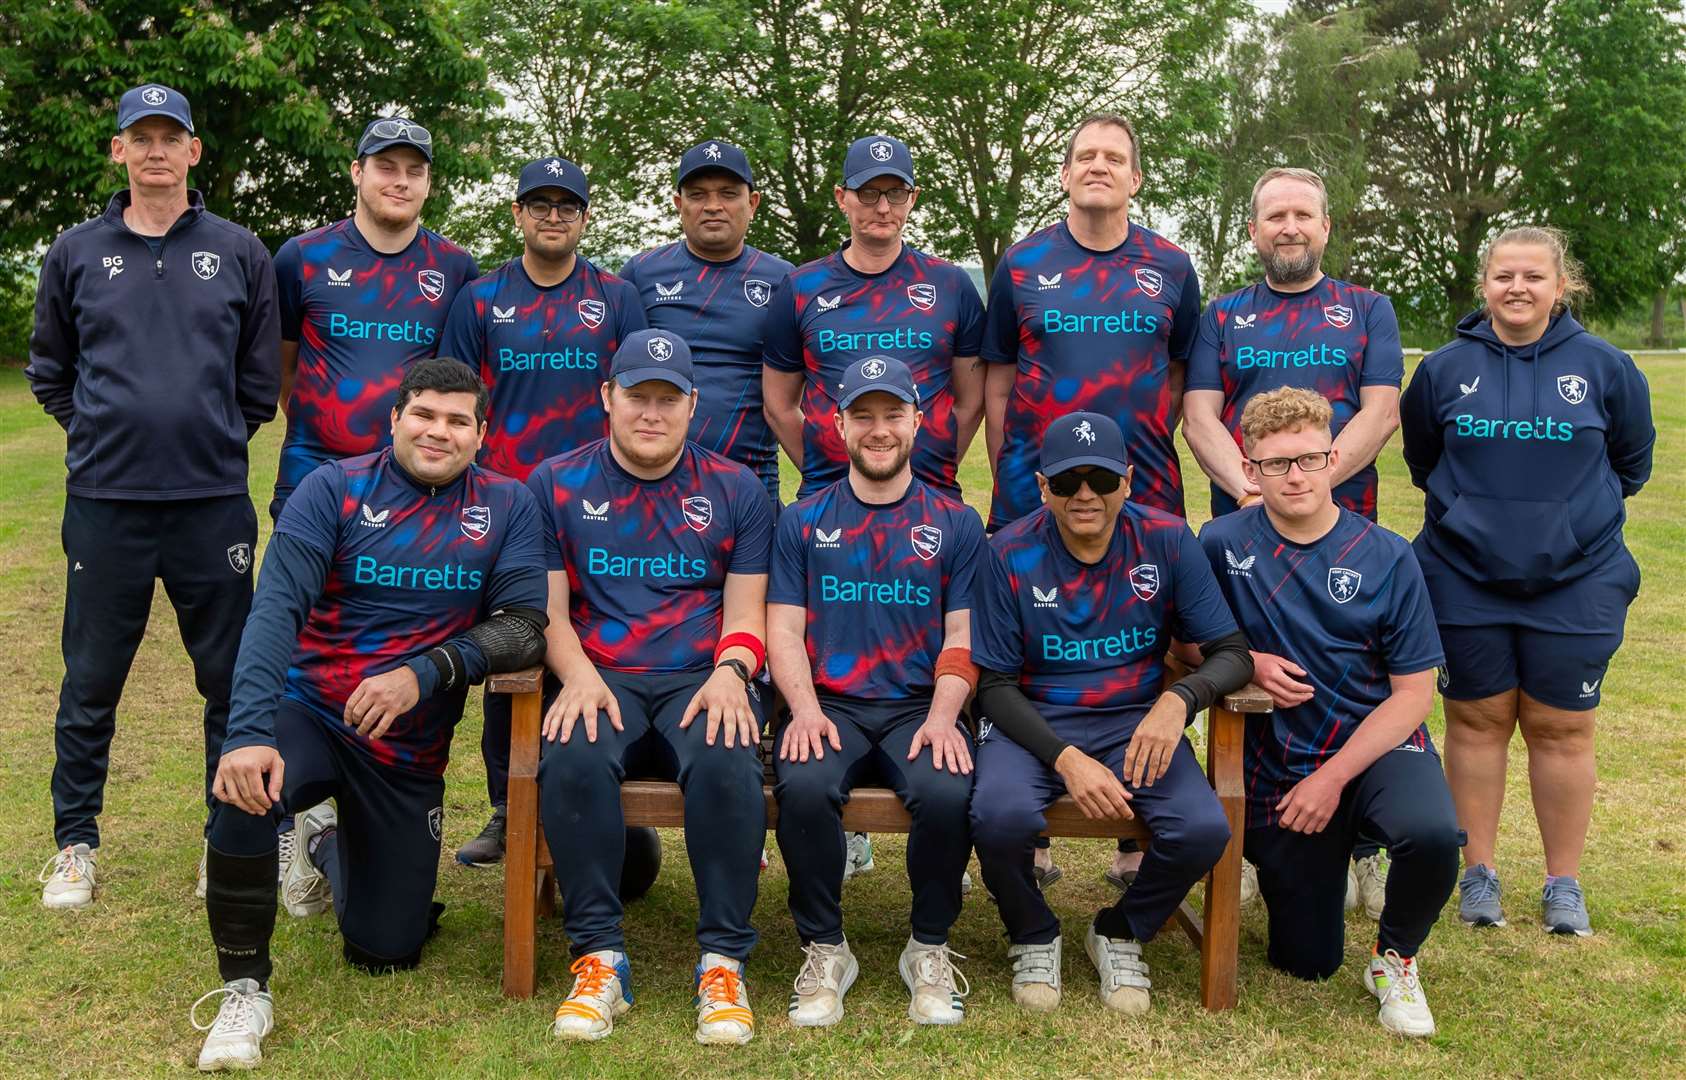 Kent’s visually-impaired team who lost to defending David Townley Memorial Twenty20 Cup winners Sussex Sharks on Saturday. Picture: Ian Scammell